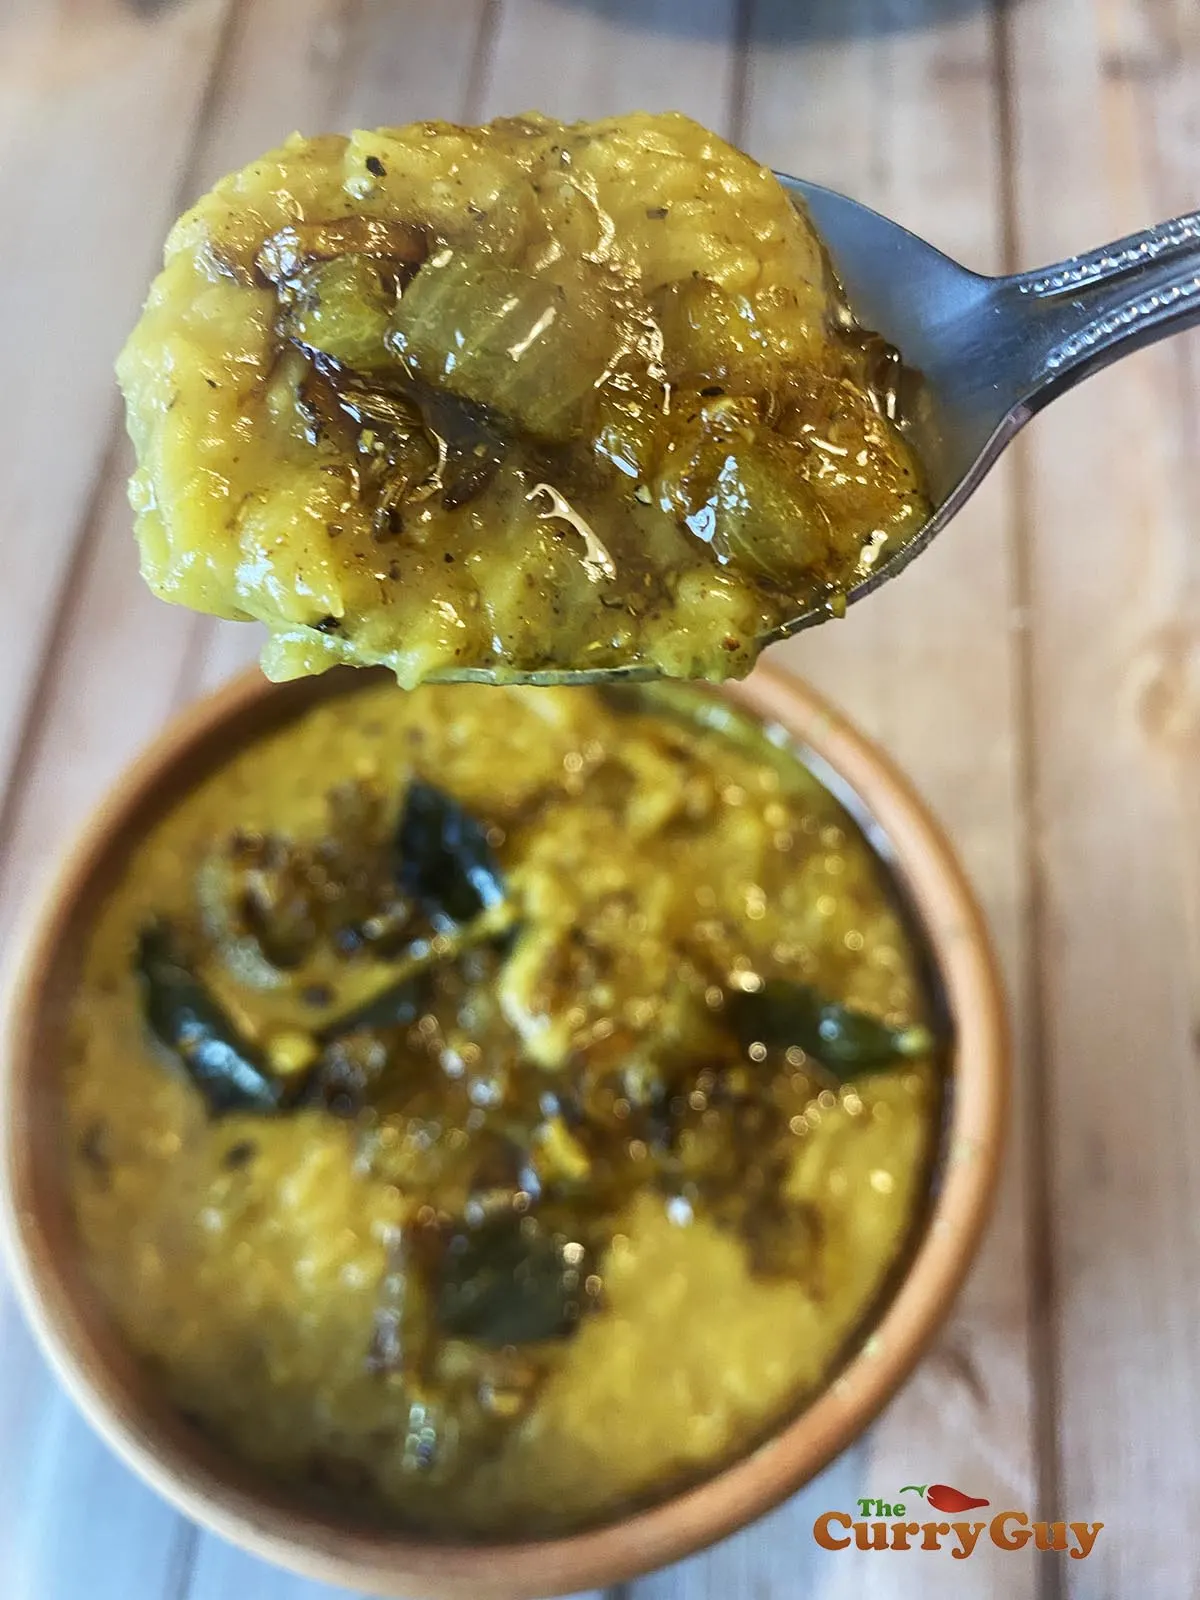 Spoon with dhal on it.